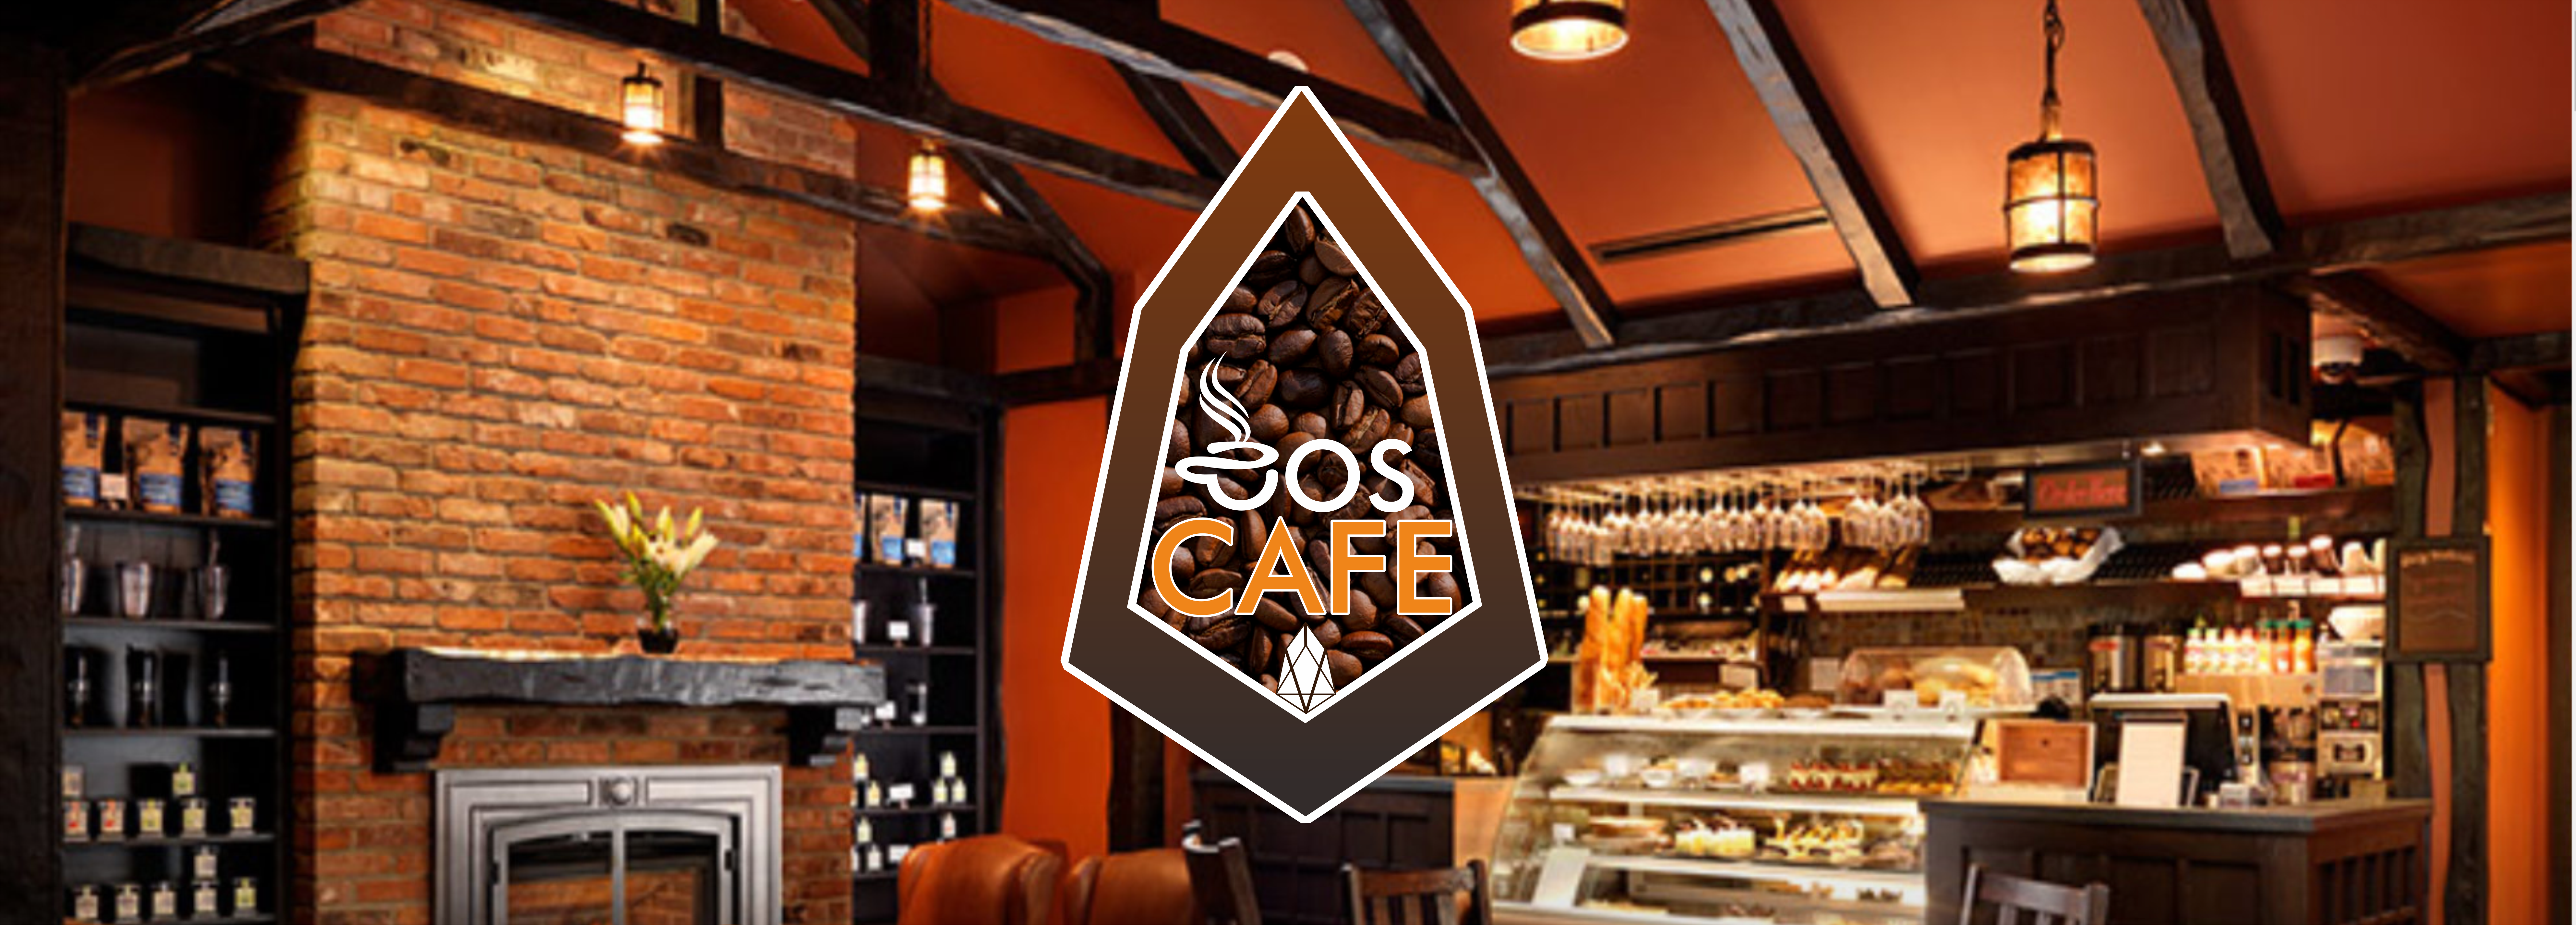 EOS CAFE.png